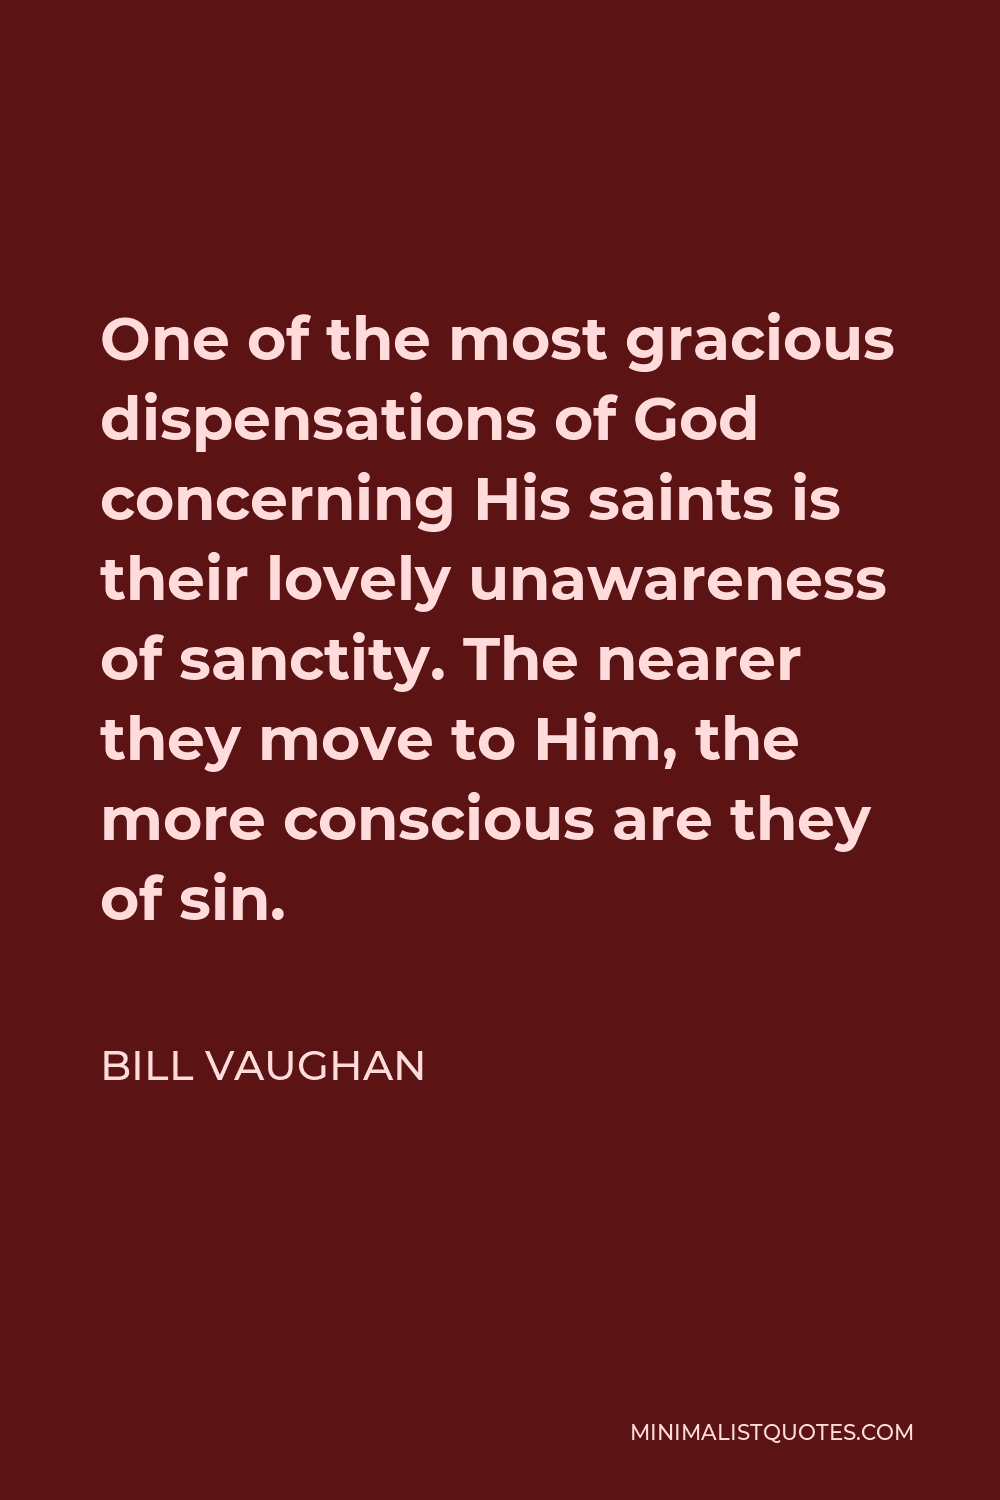 Bill Vaughan Quote - One of the most gracious dispensations of God concerning His saints is their lovely unawareness of sanctity. The nearer they move to Him, the more conscious are they of sin.